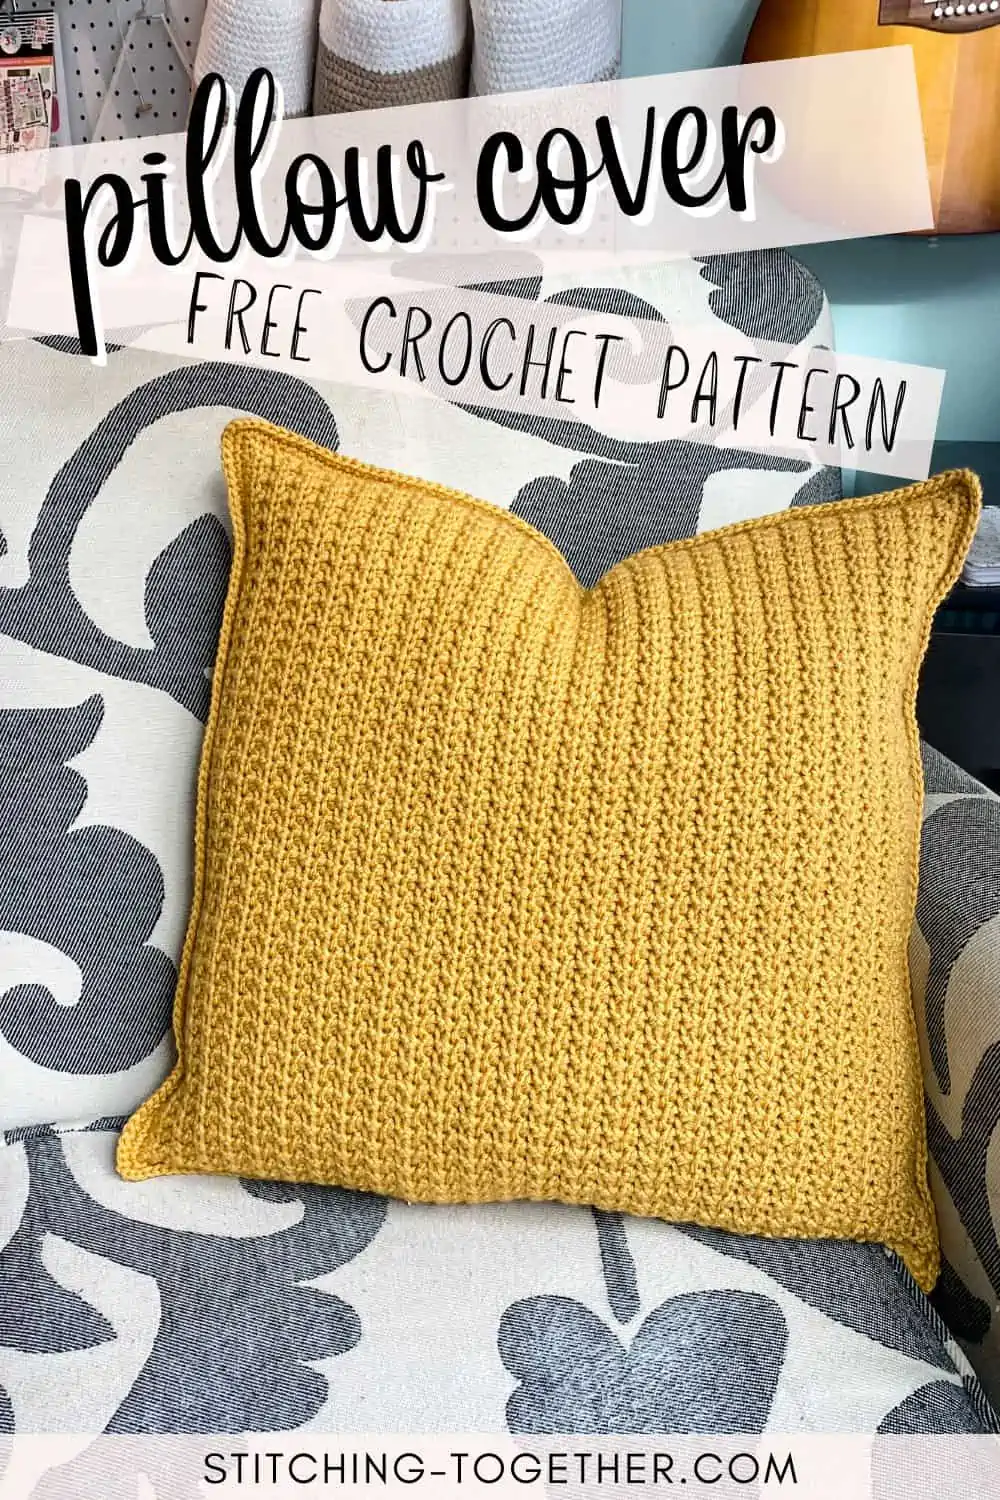 graphic reading "pillow cover free crochet pattern" with image of a crochet pillow on a chair